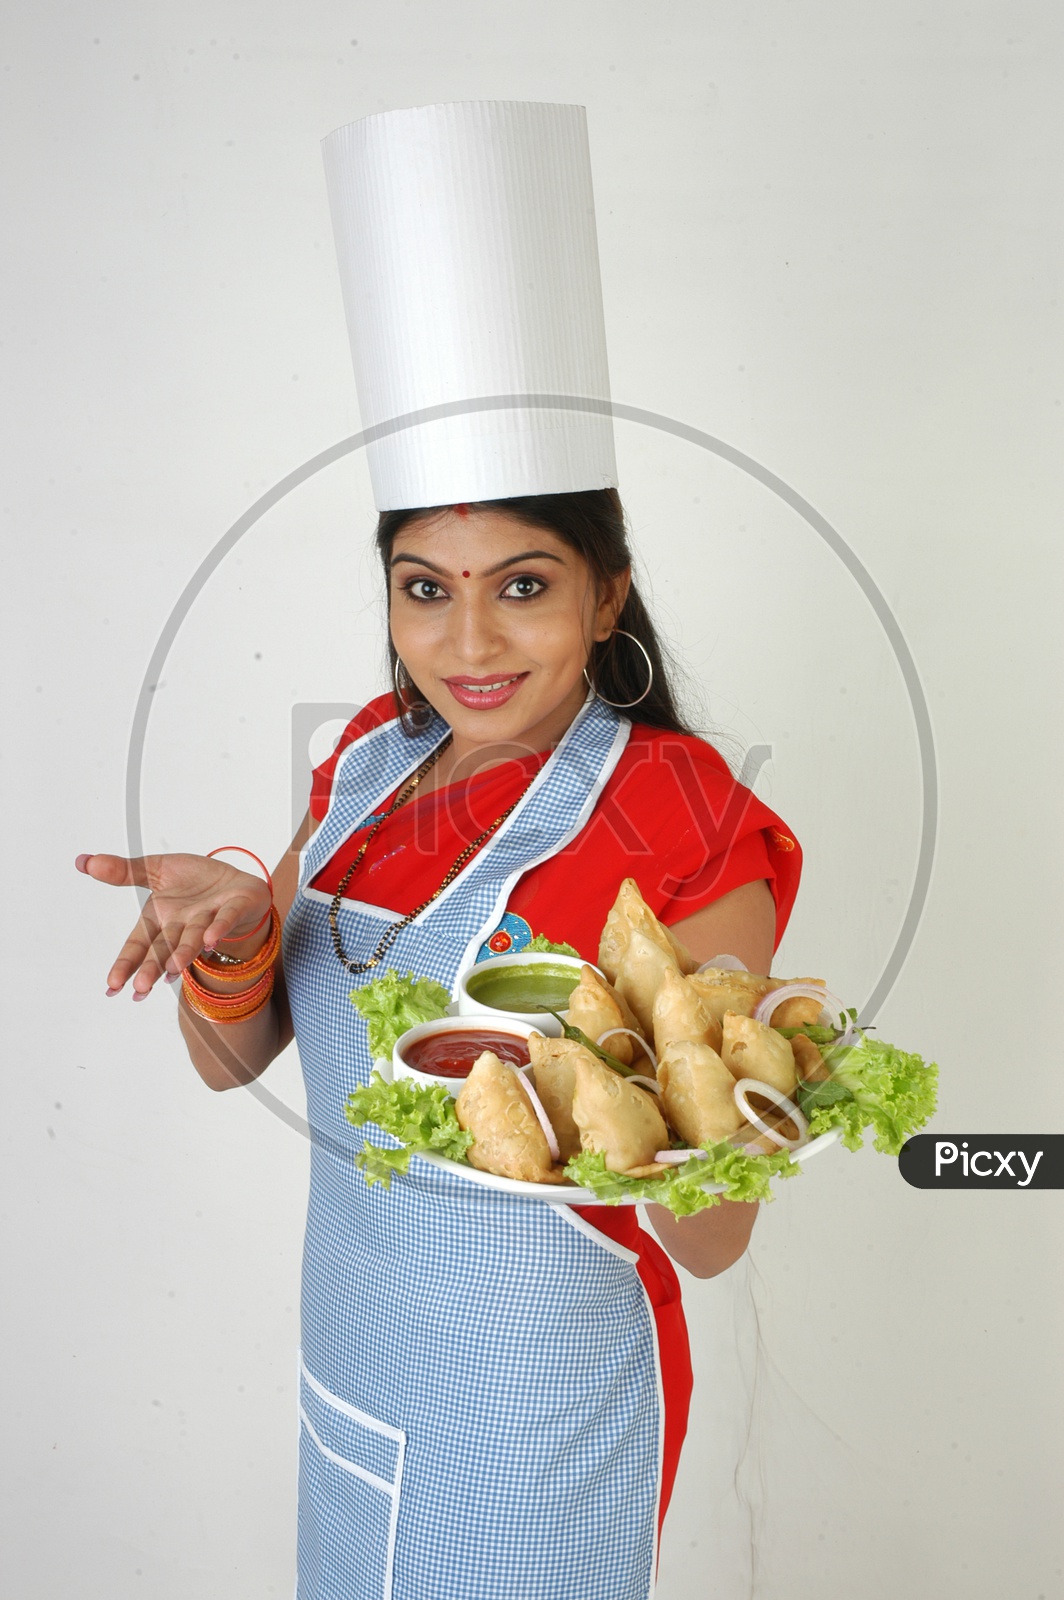 Image Of An Indian Woman Chef In Kitchen Apron And Cap Holding Samosas 